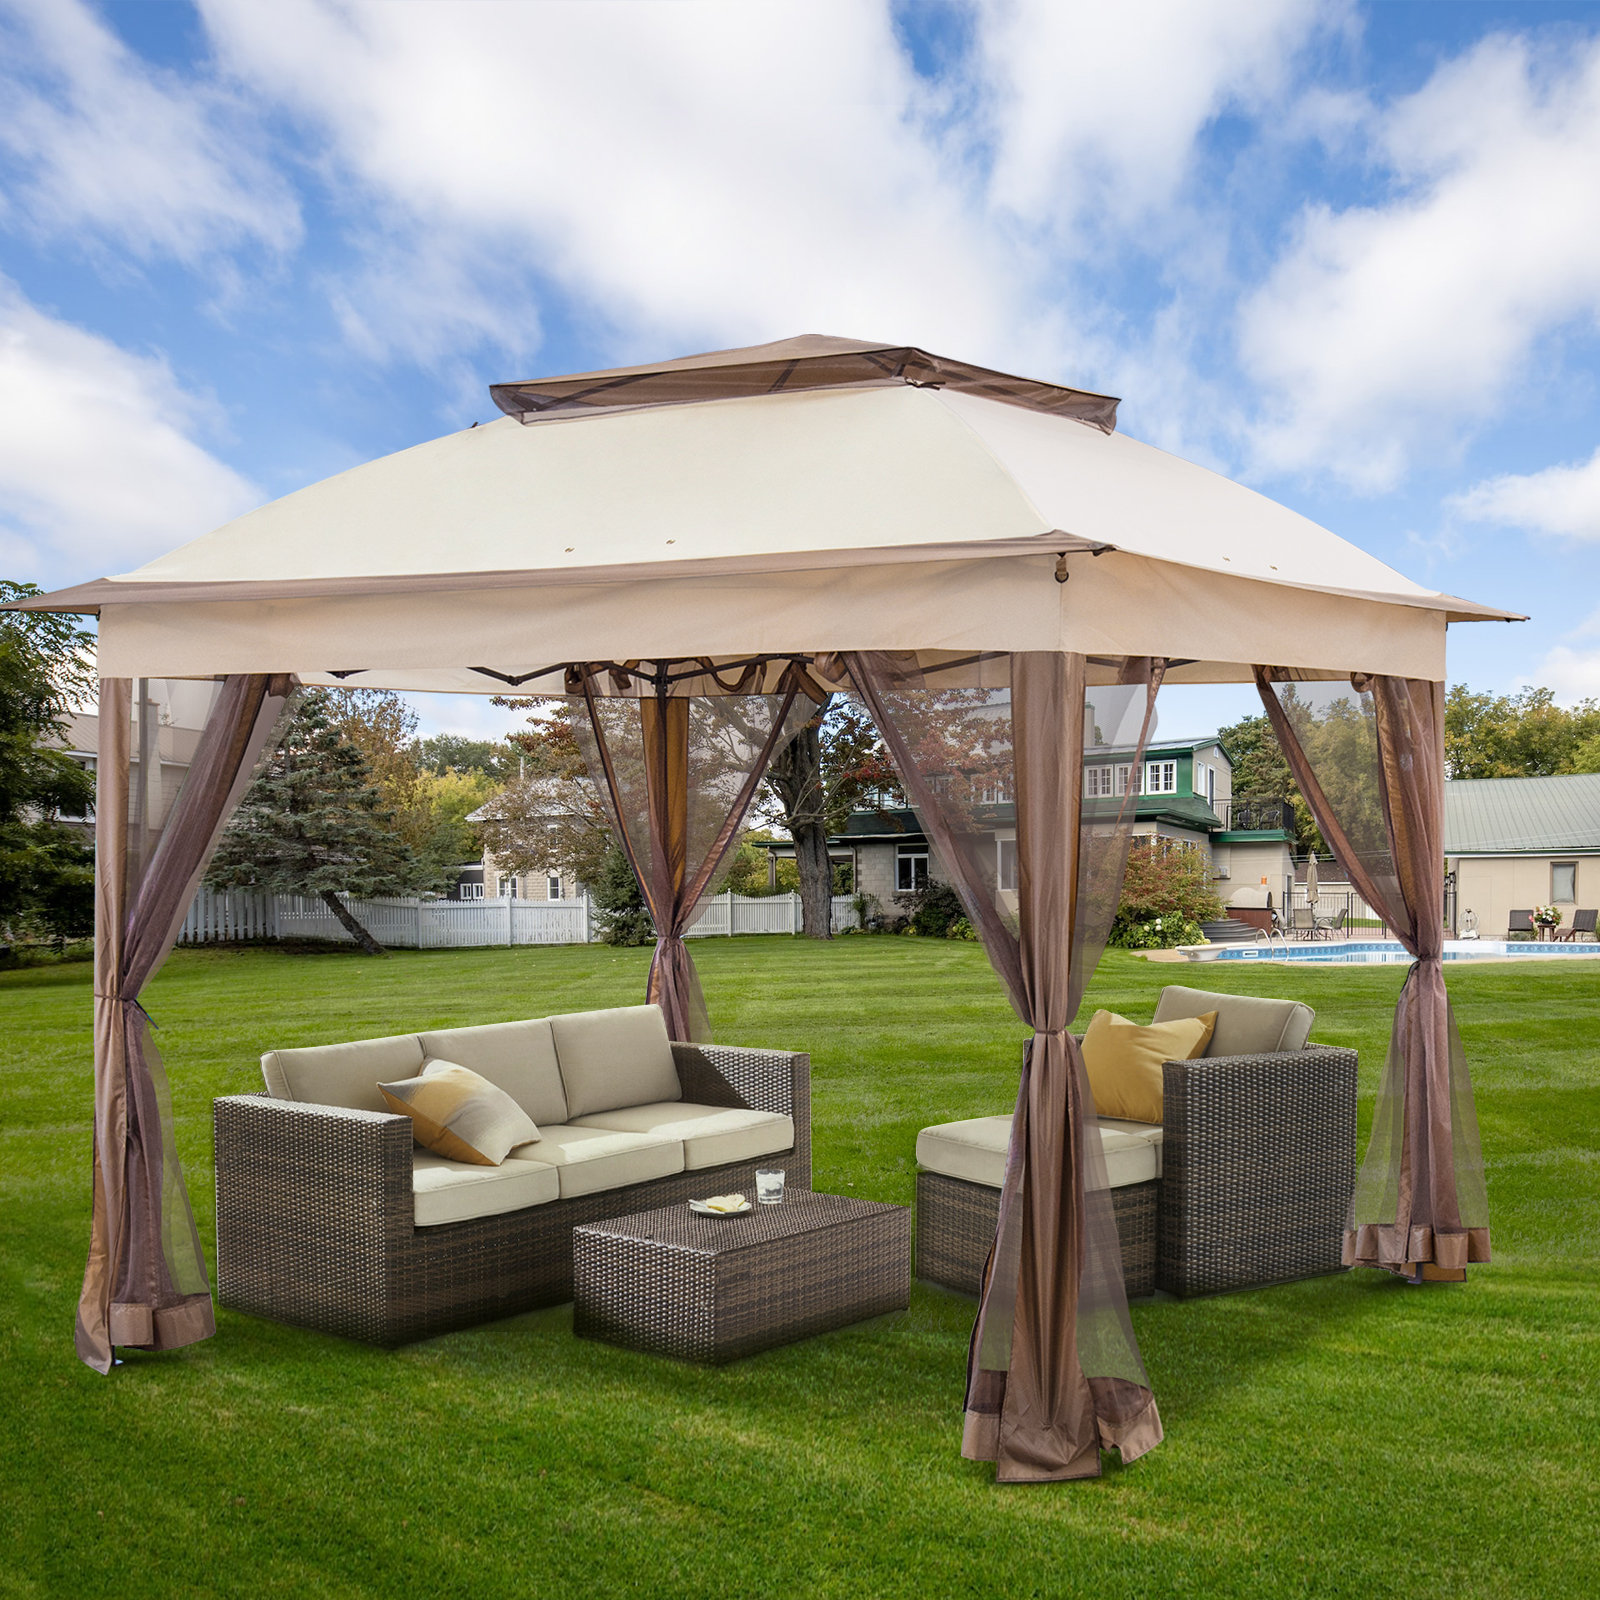  Canopy Leg Drape Accessories - 8 Foot. Canopy Not Included. :  Patio, Lawn & Garden